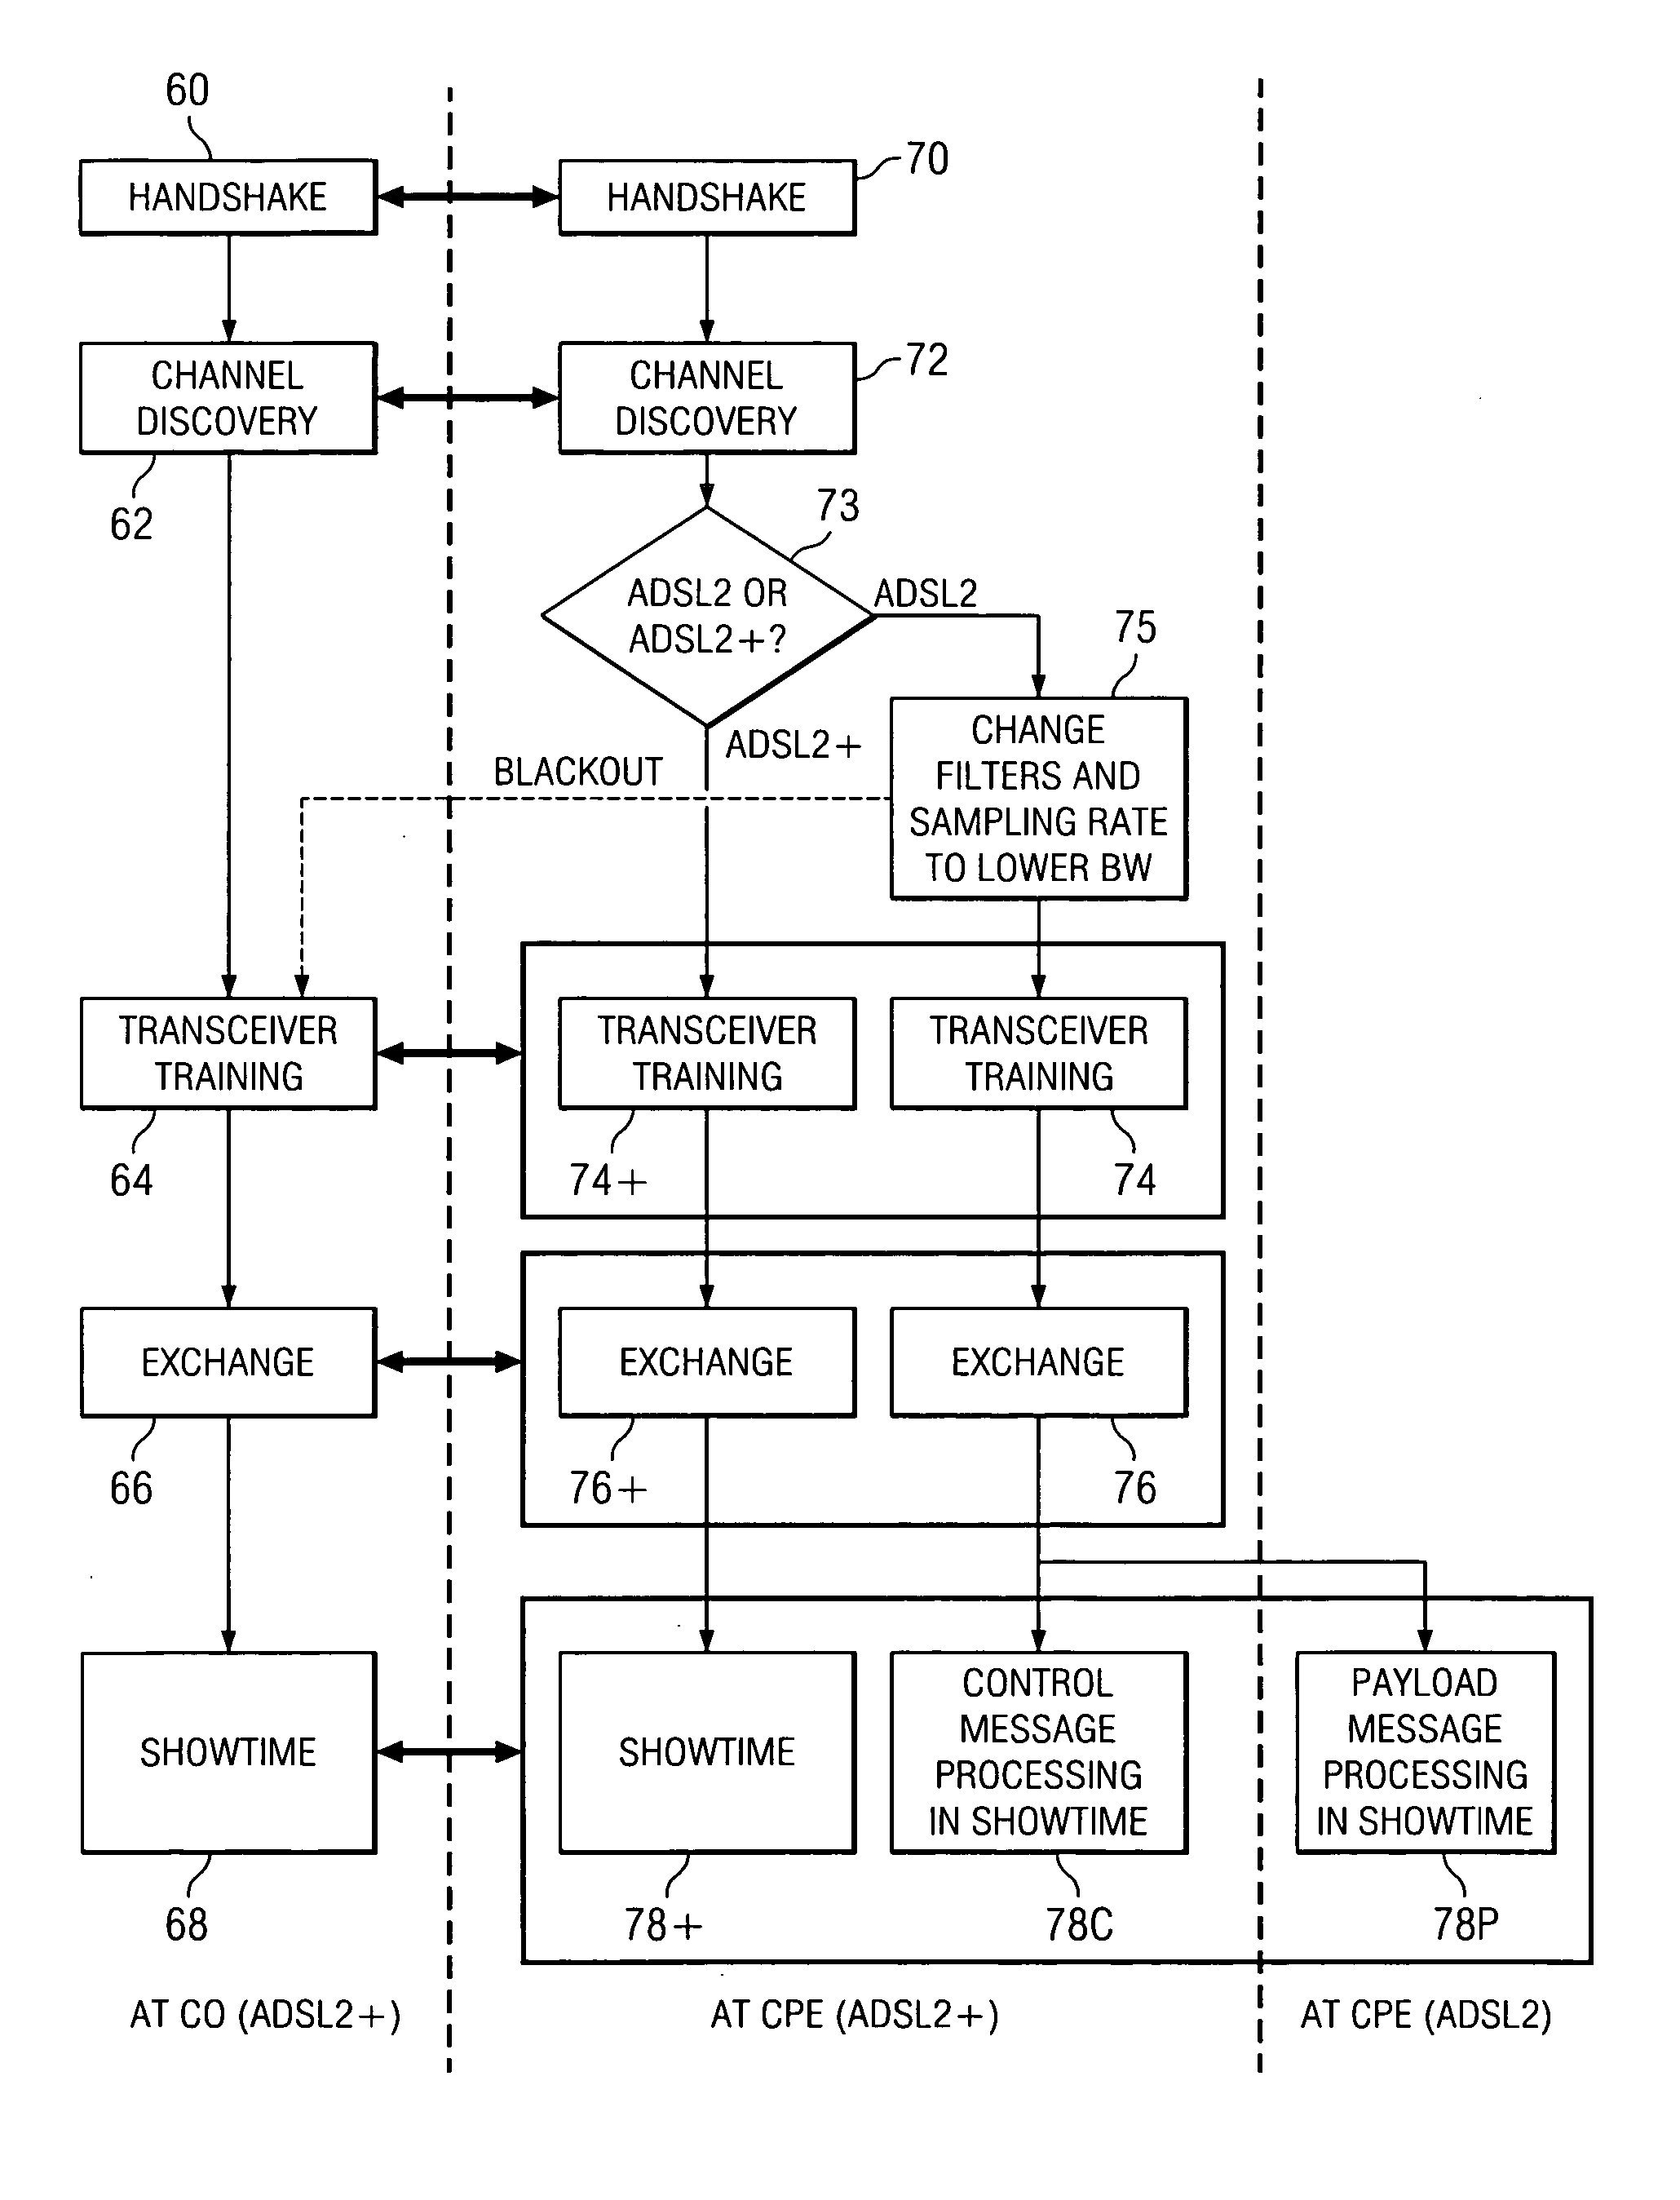 Receiver-side selection of DSL communications mode